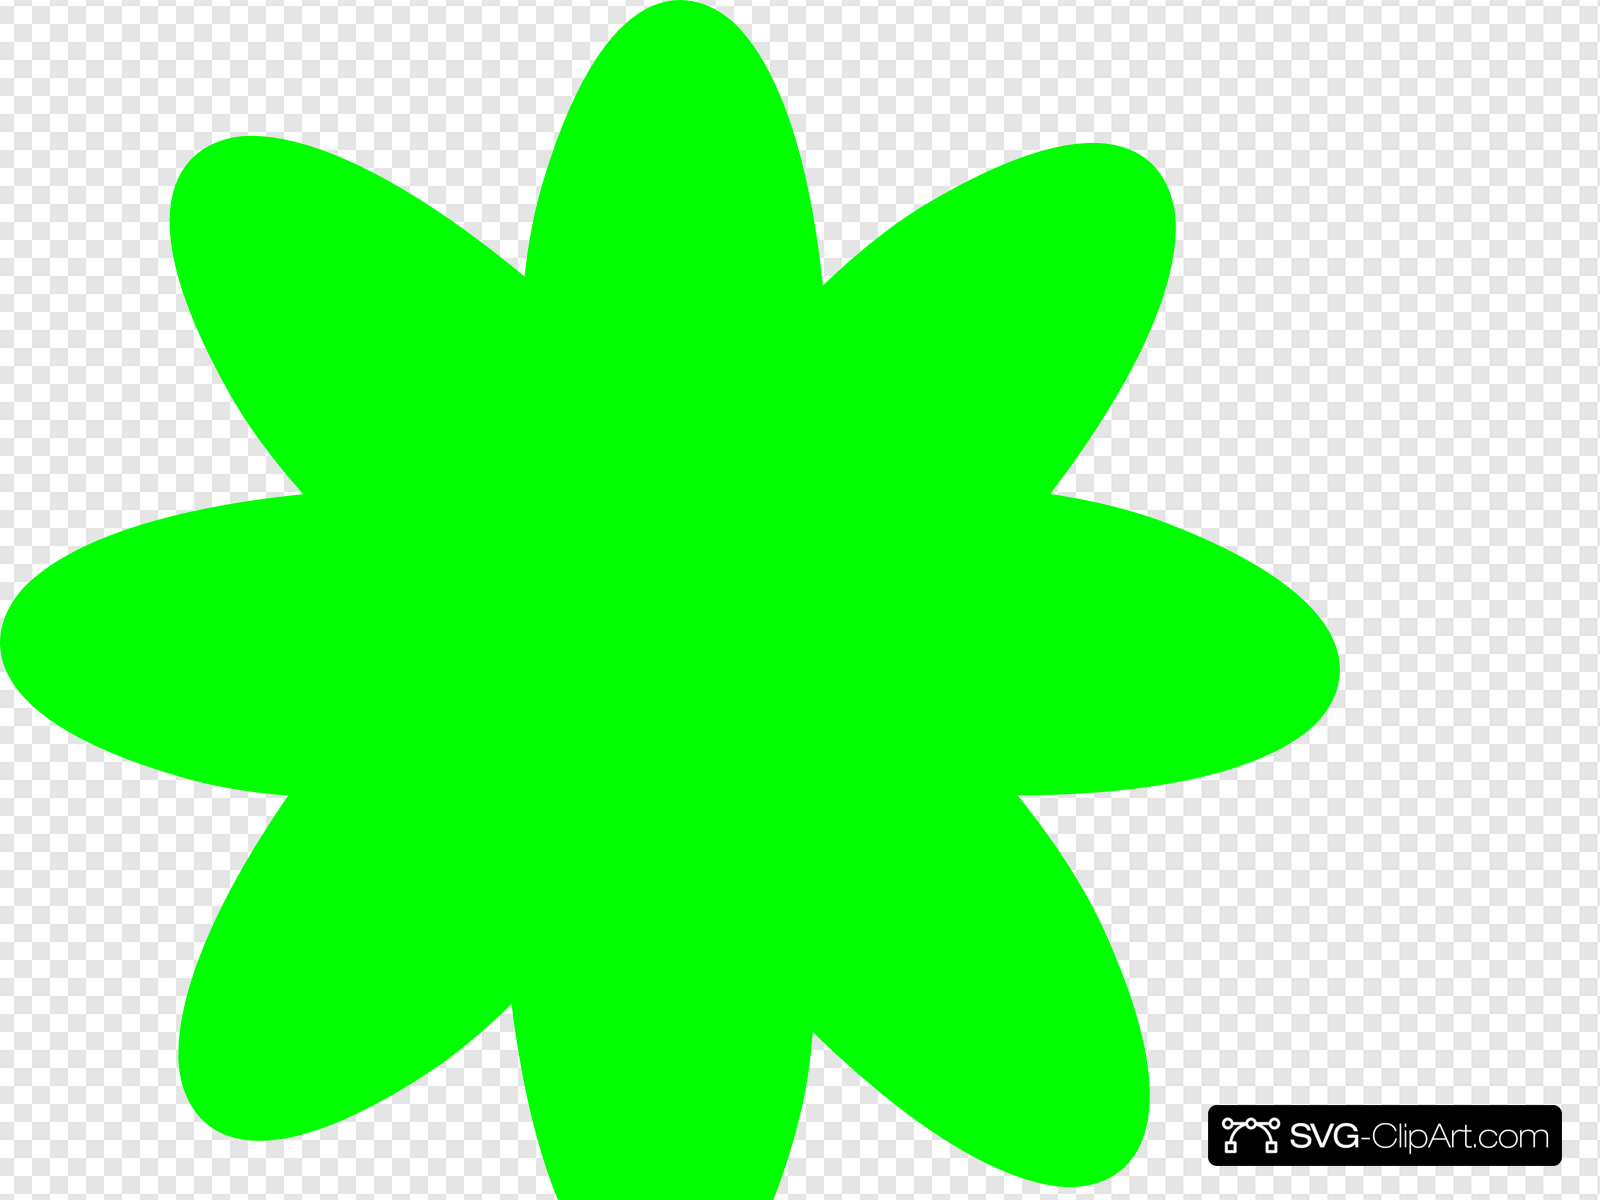 Lime Green Flower Clip art, Icon and SVG.